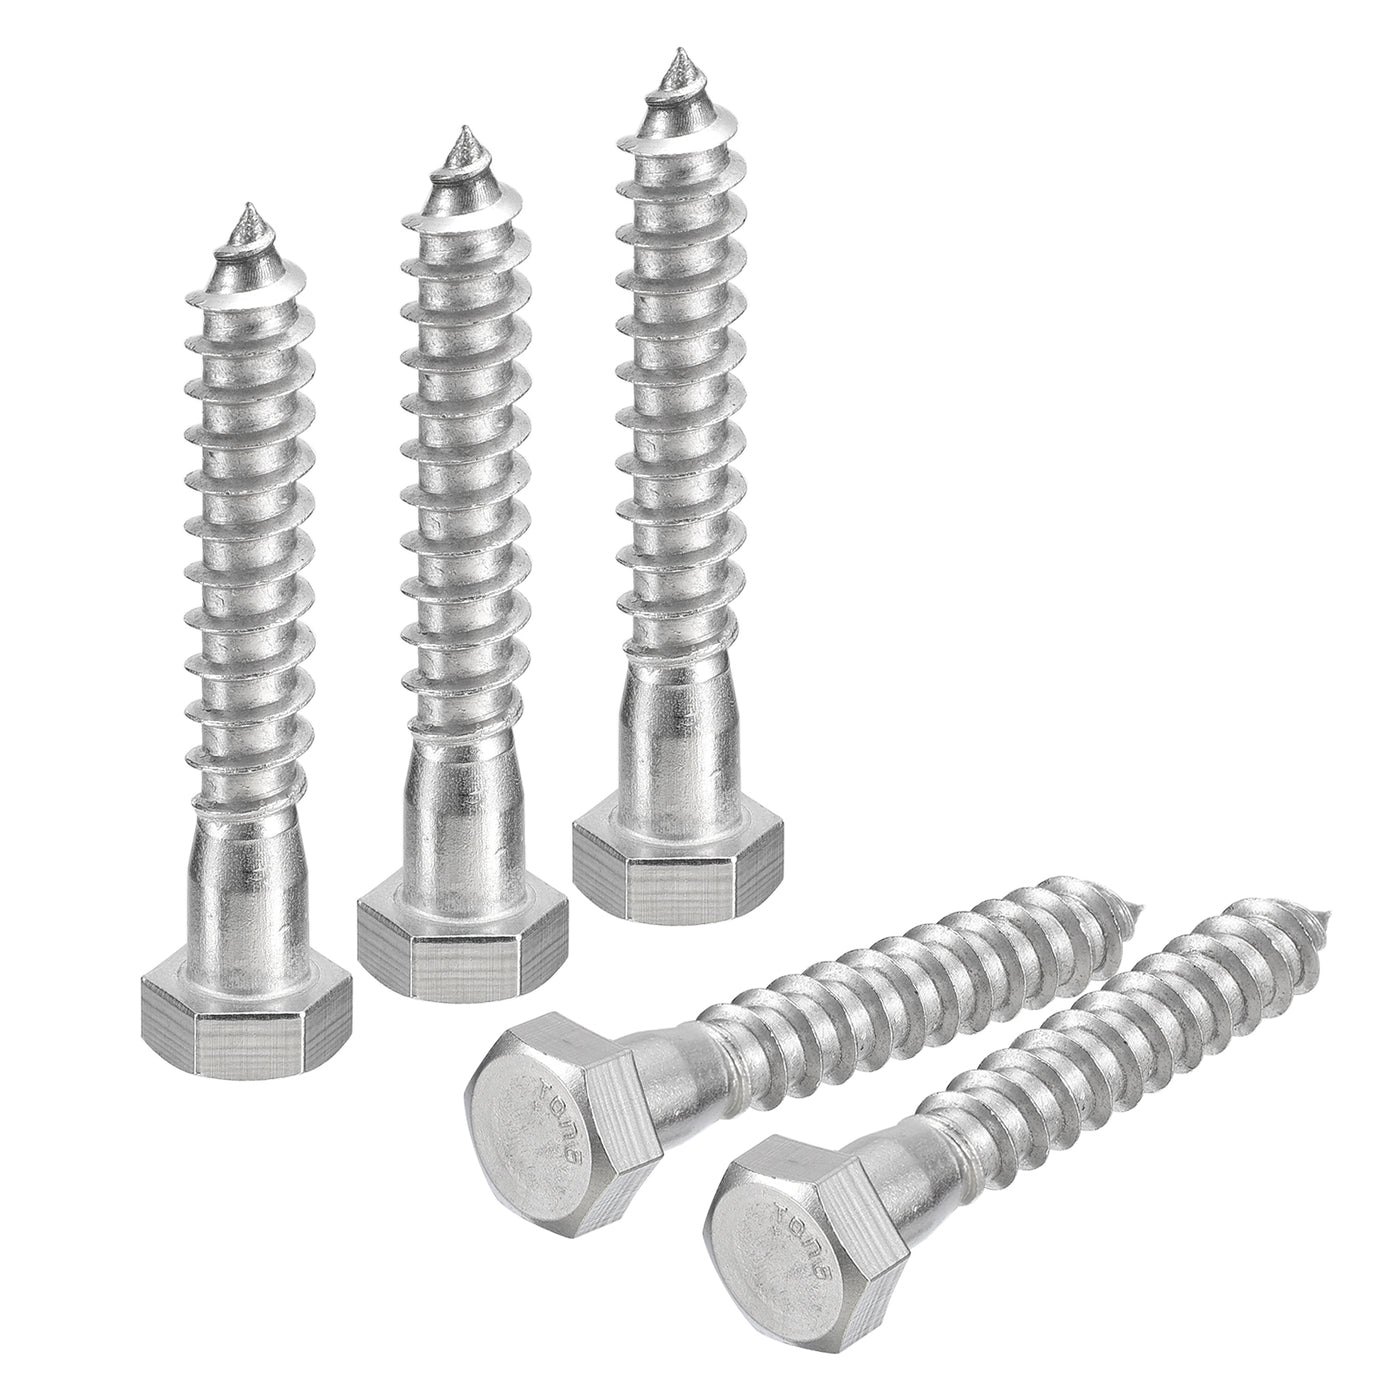 uxcell Uxcell Hex Head Lag Screws Bolts, 10pcs 3/8" x 2-1/2" 304 Stainless Steel Wood Screws